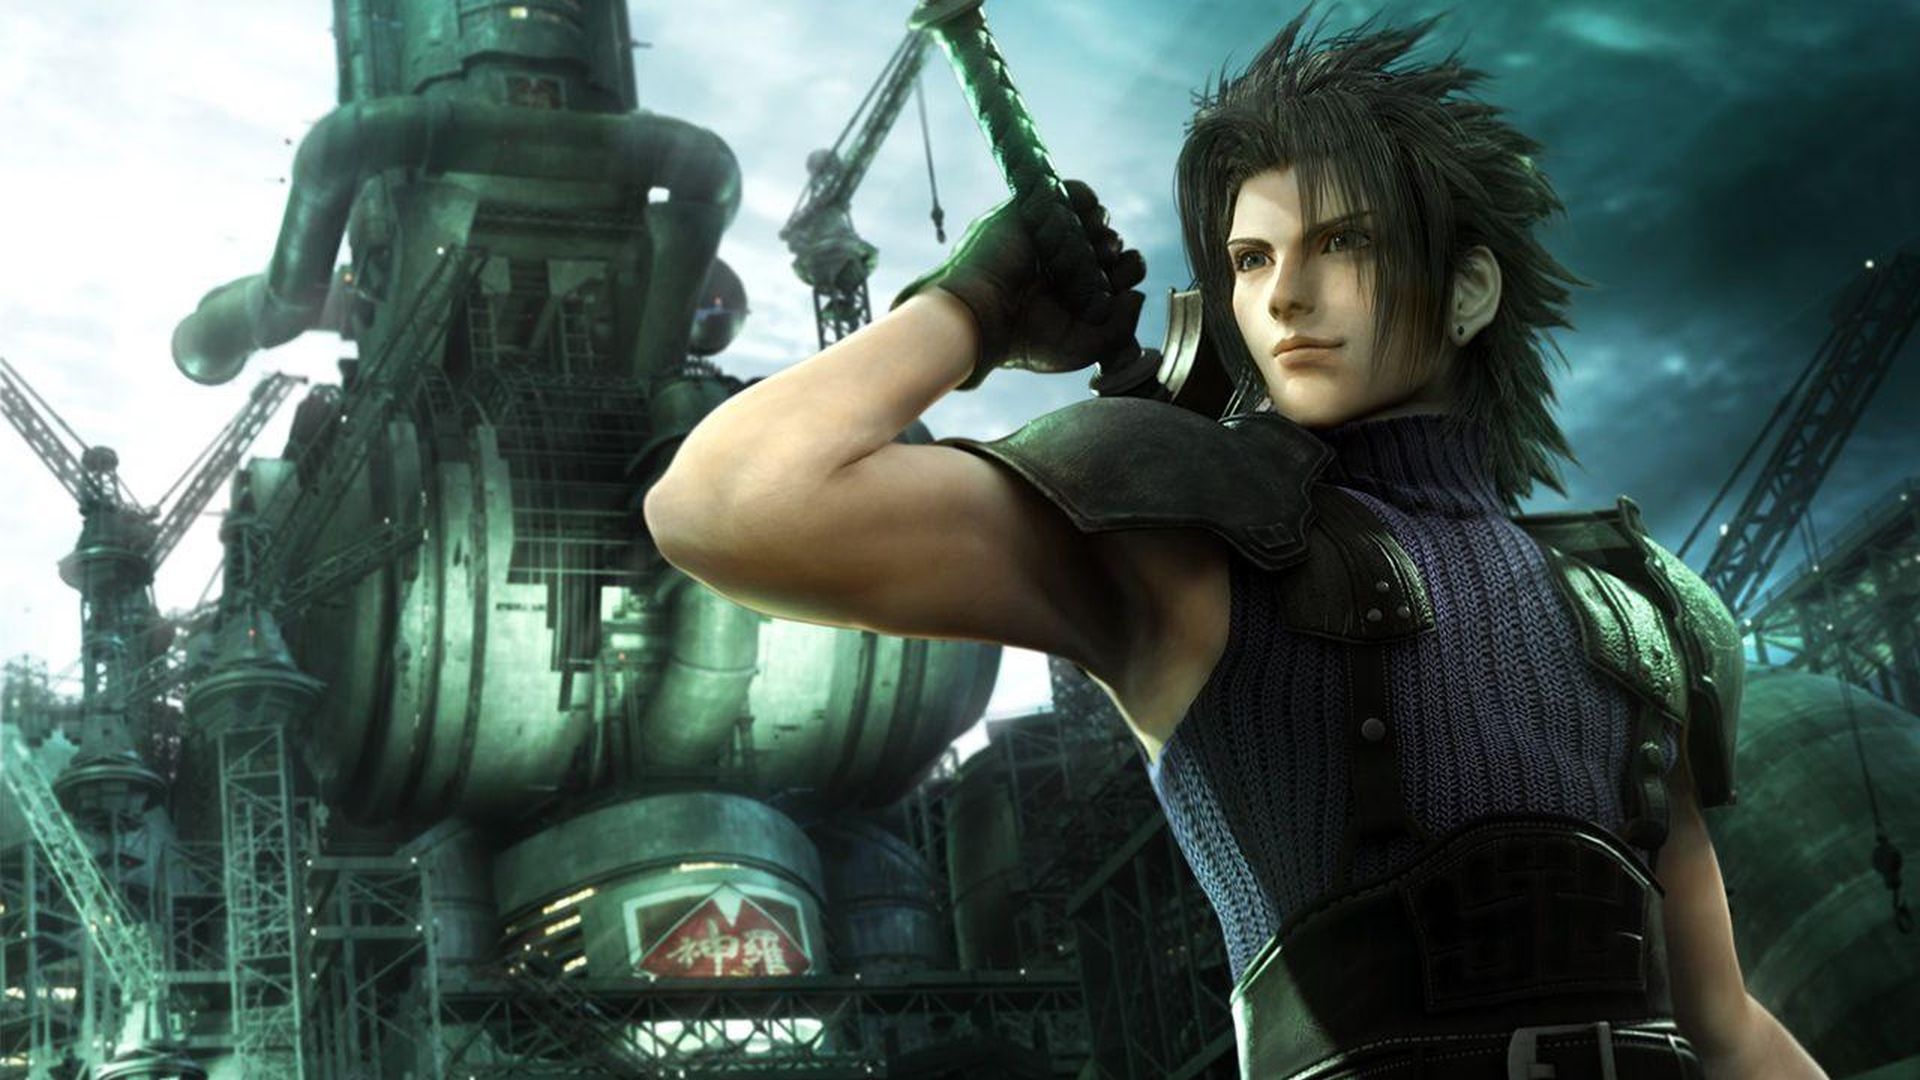 This Final Fantasy 7 Game Is Coming To Xbox